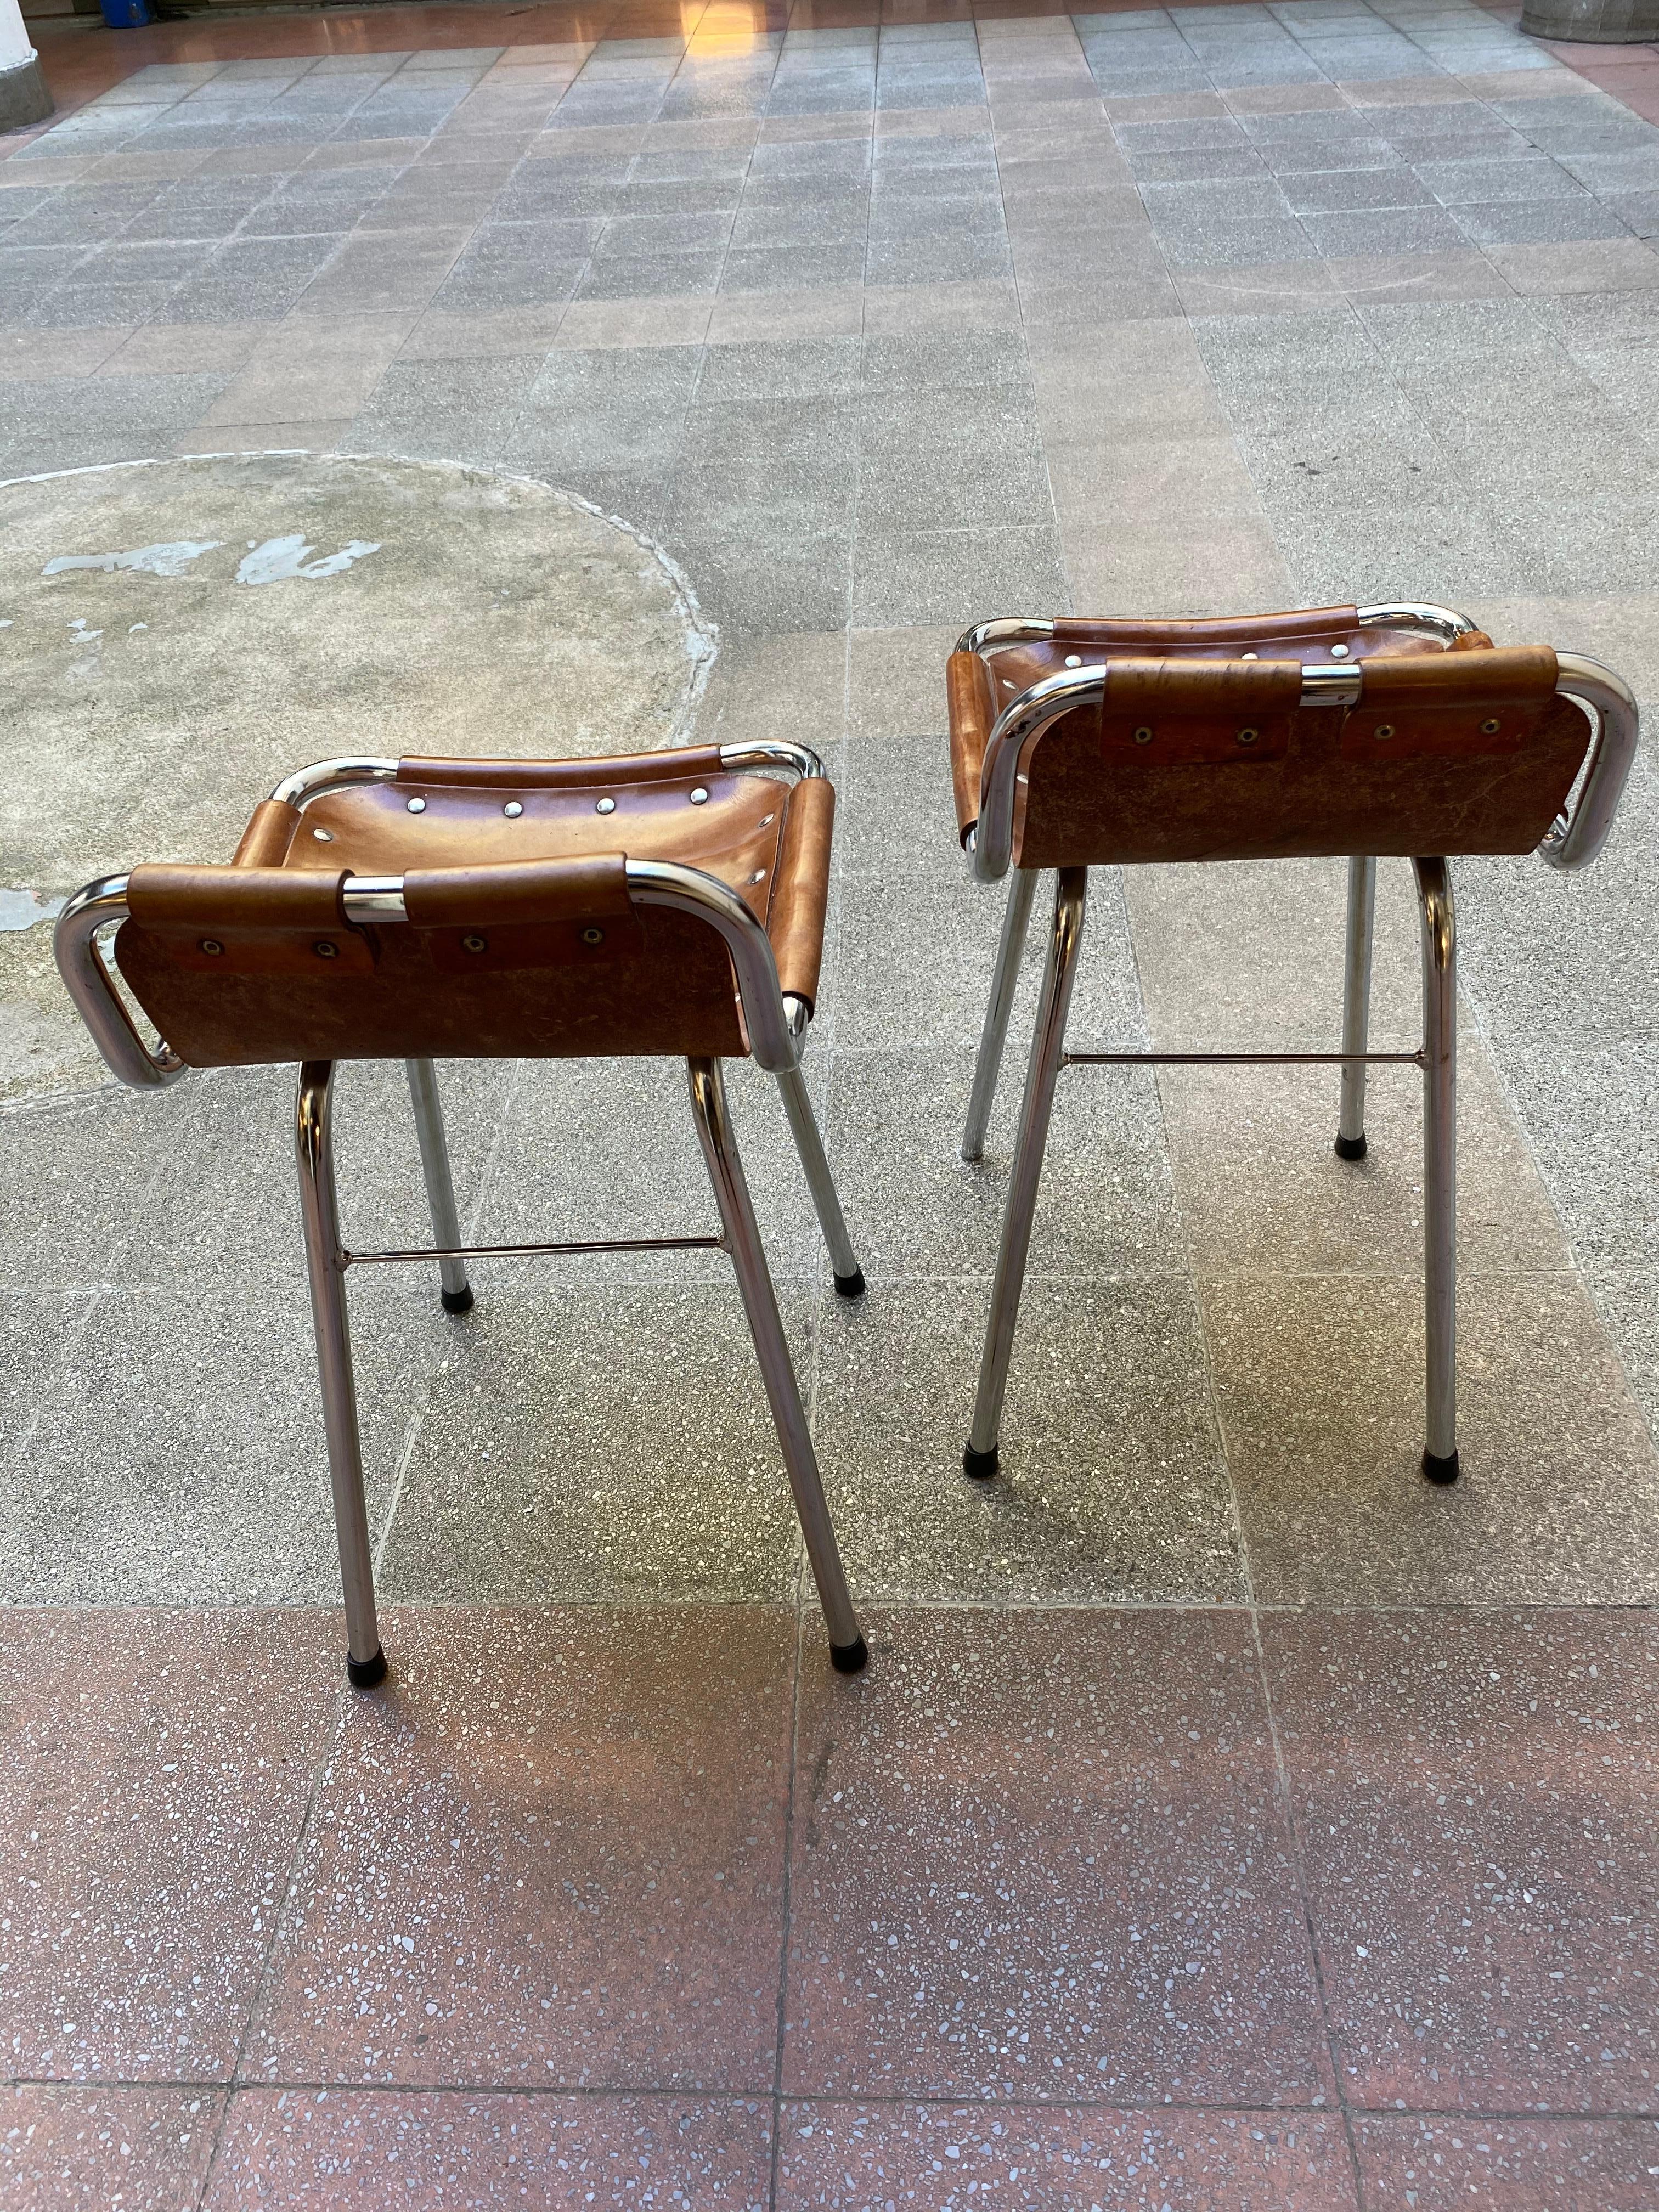 Charlotte Perriand
Rare. Pair of Les Arcs 1600 Stoolss, Cassina edition, circa 1969

Cowhide leather and steel

Size: Length 47 cm
Width 59 cm
Height 70 cm
Seat height 55 cm

Excellent condition
Selling price: 2600 Euros.